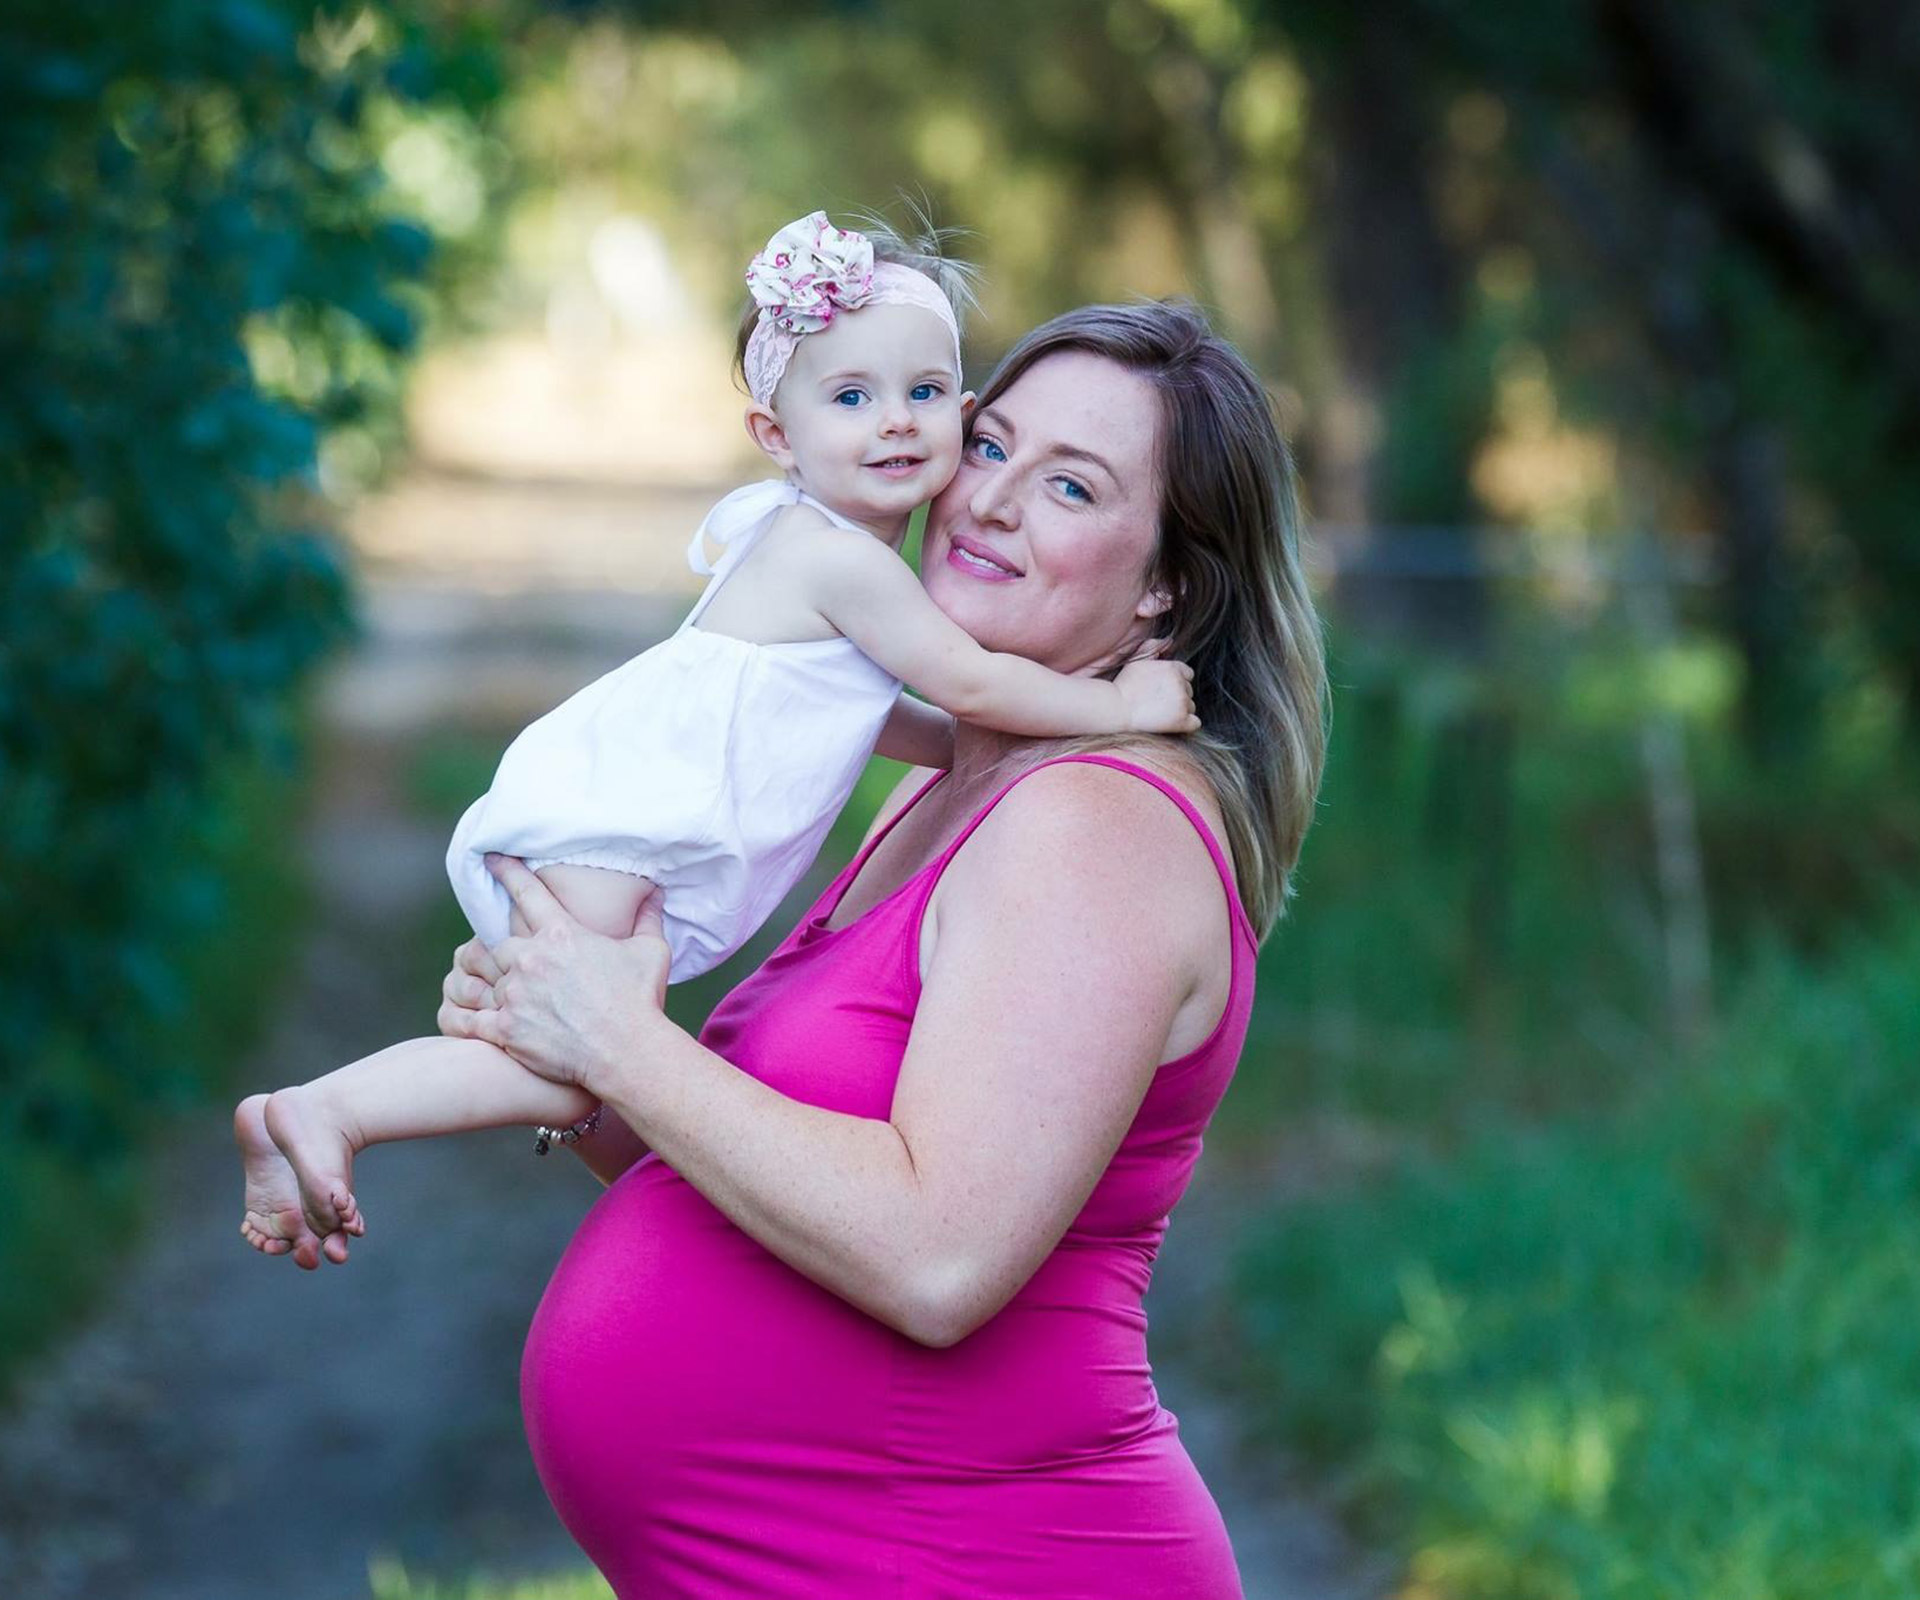 I discovered breast cancer while breastfeeding